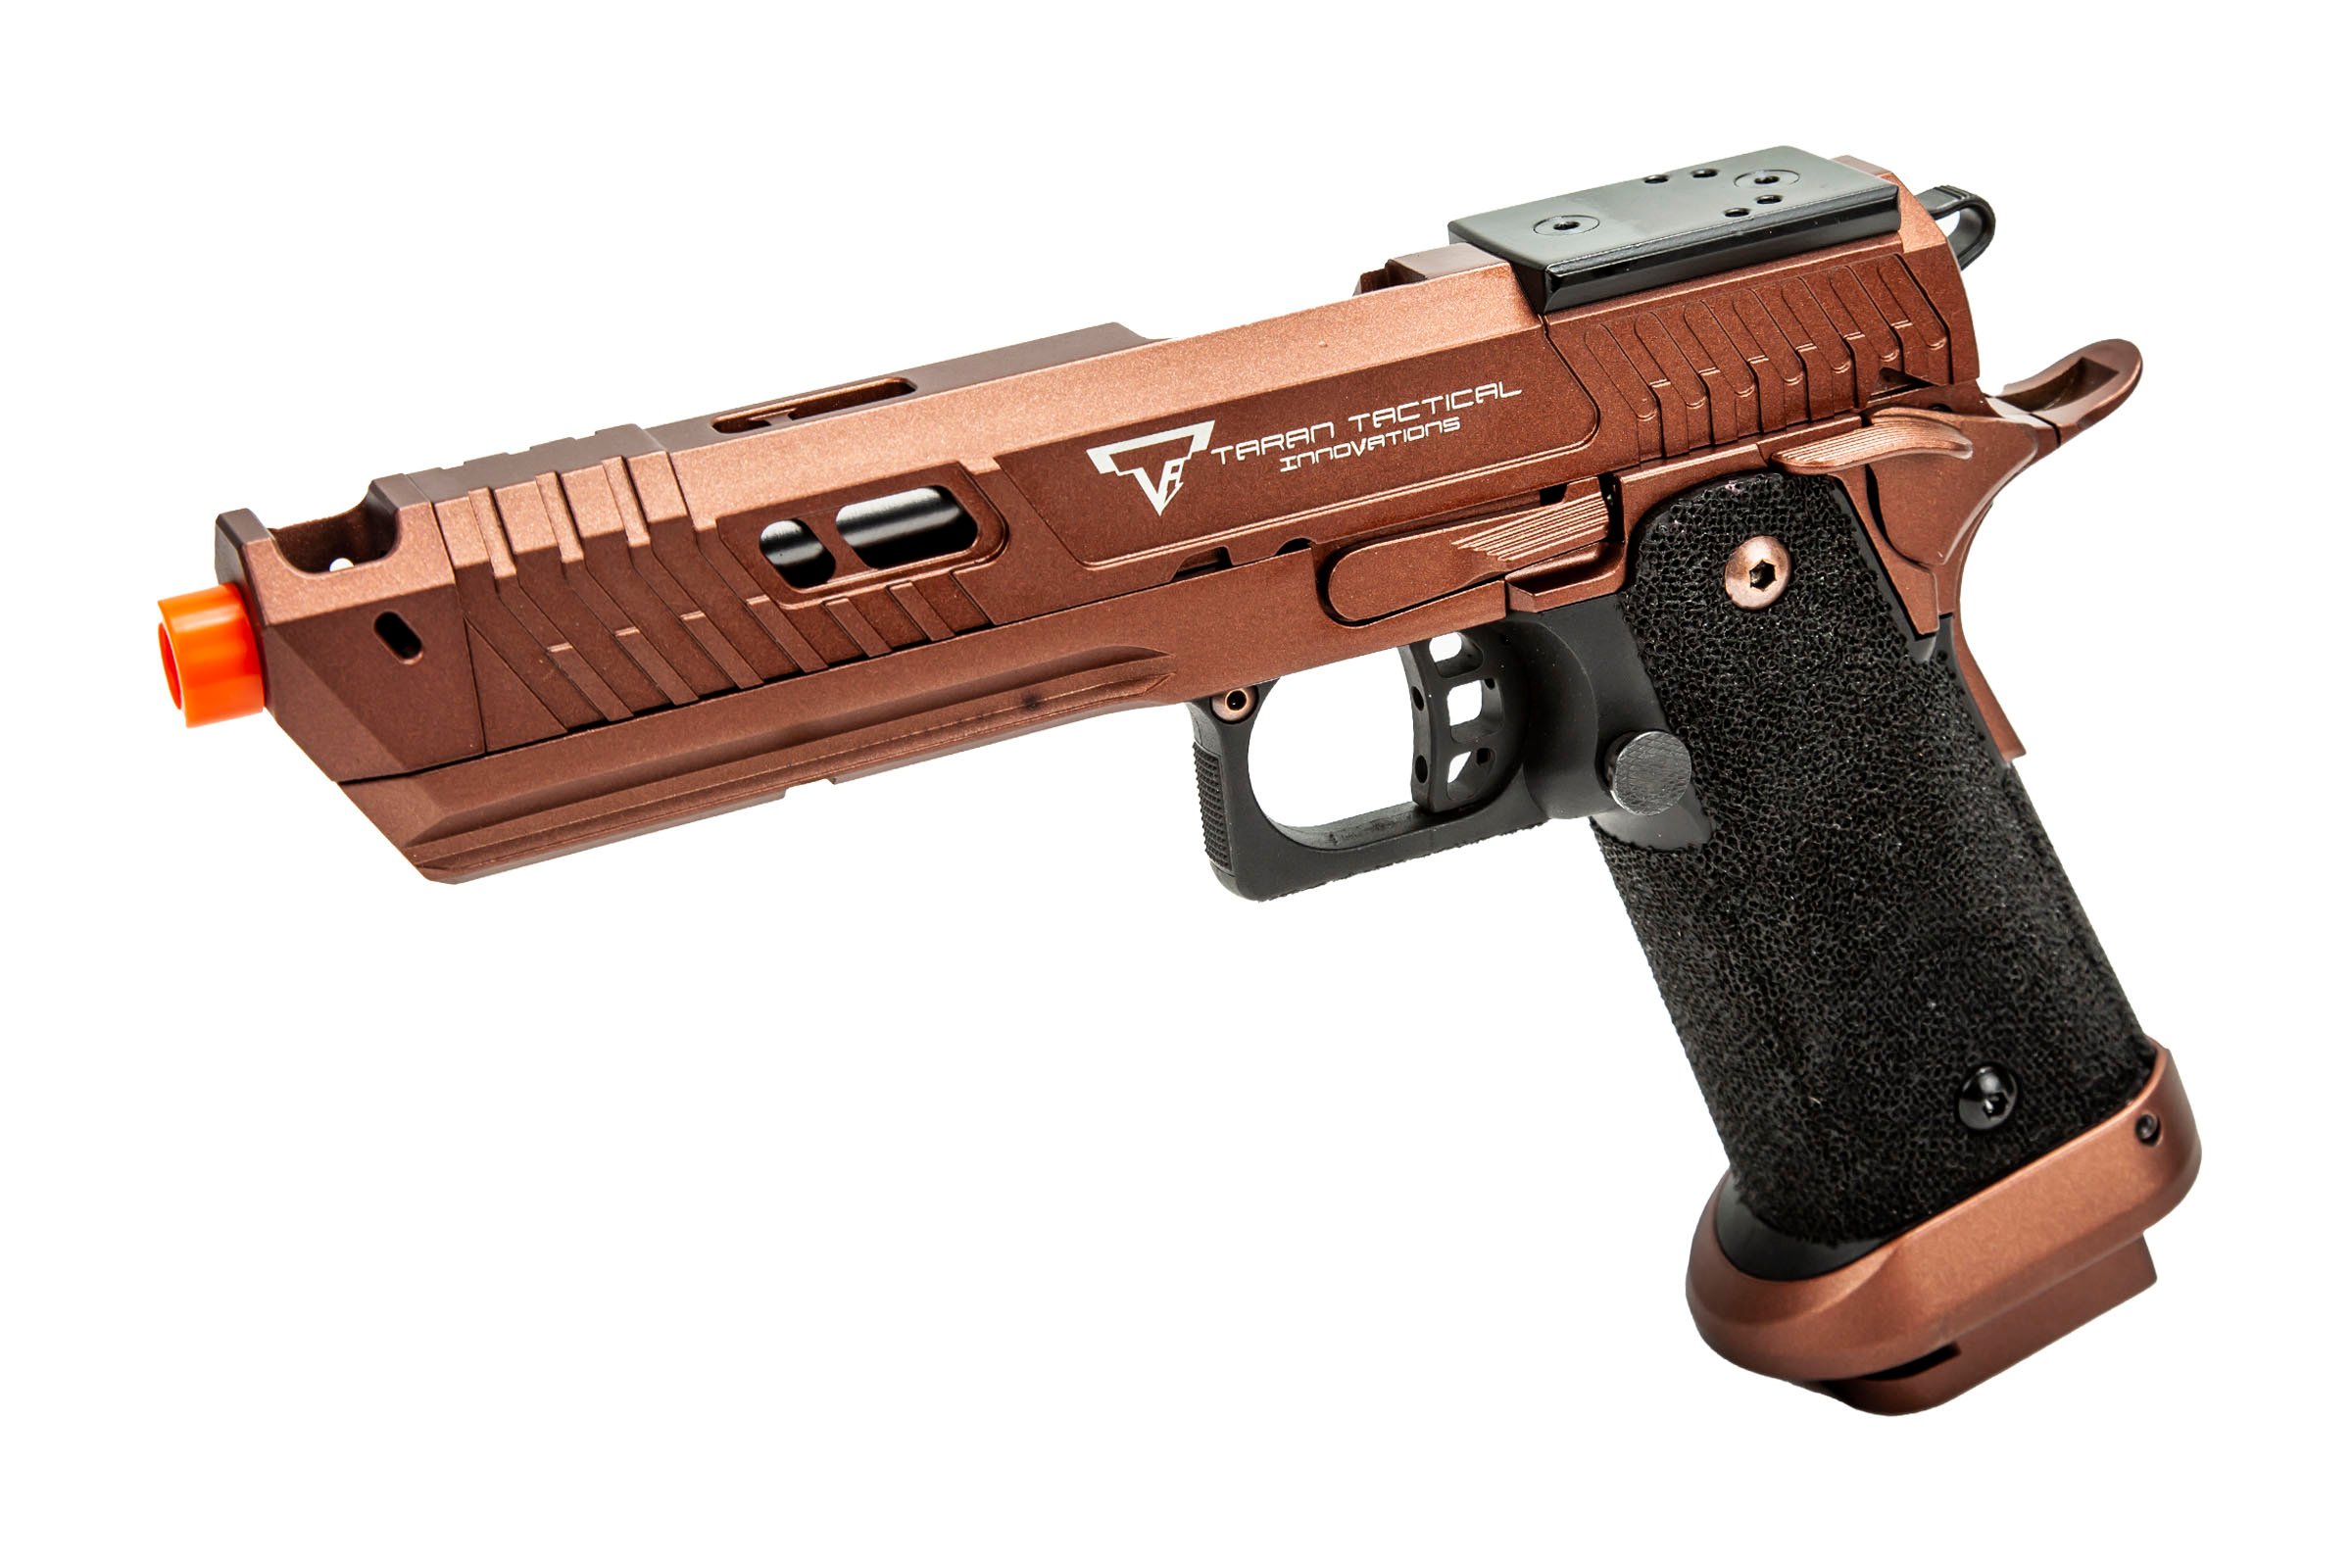 Accuracy and FPS-Boosting Upgrades for Your Glock Airsoft Gun - MiR Tactical